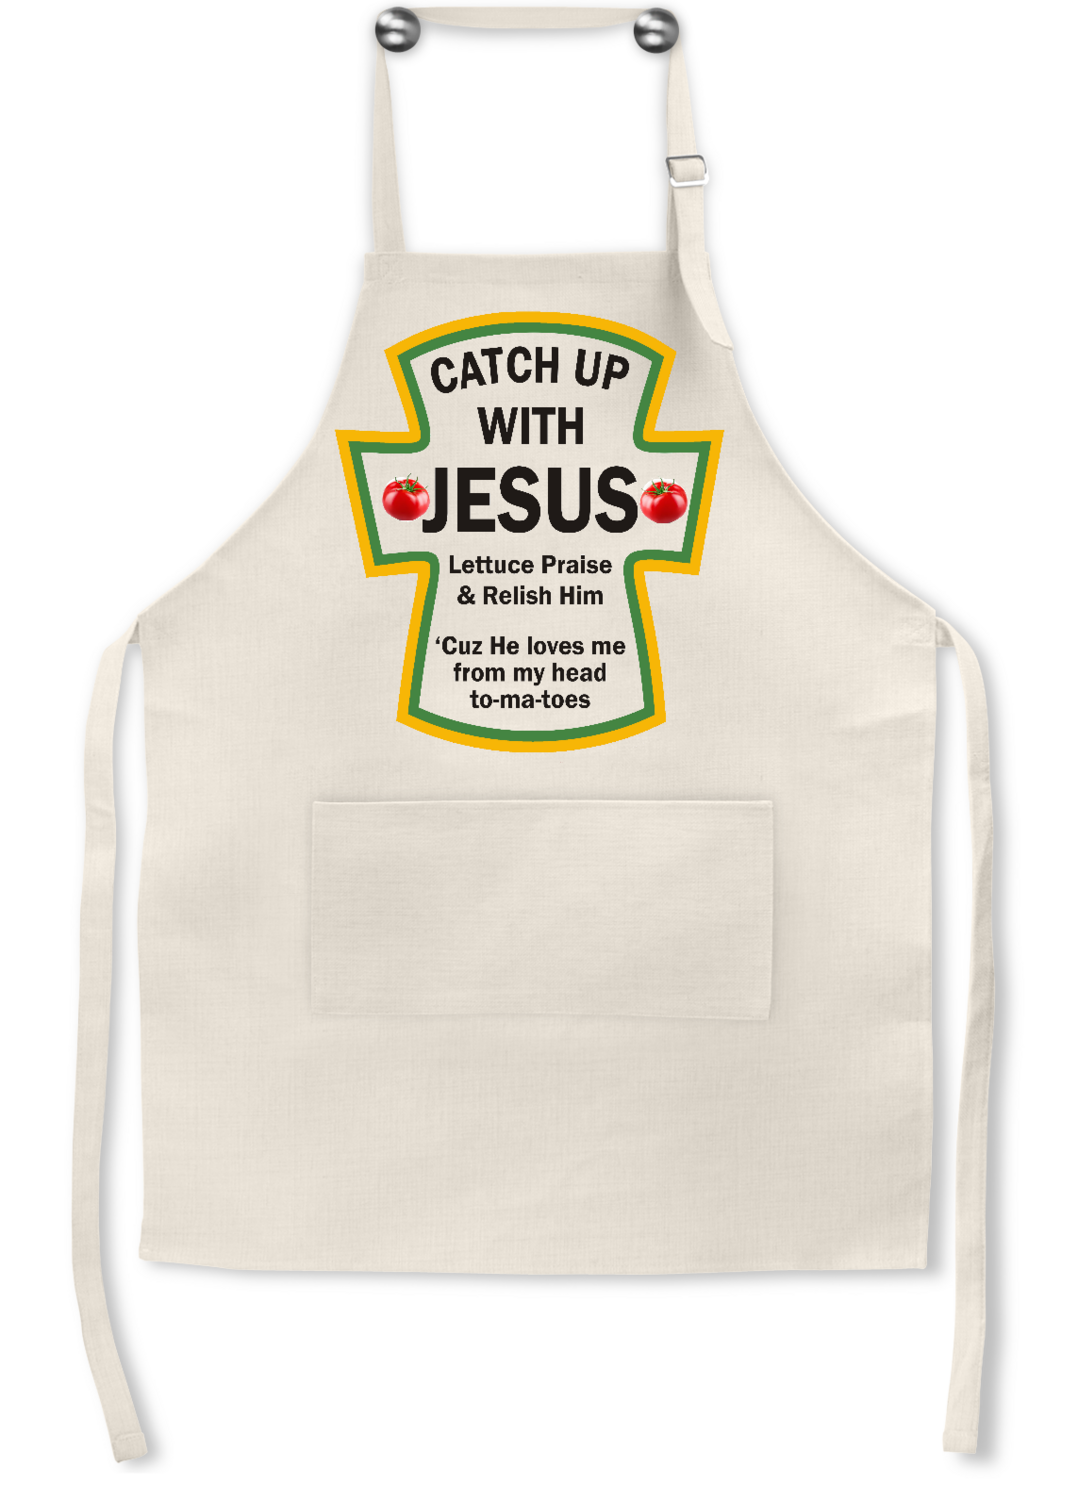 Apron: CATSUP WITH JESUS, LETTUCE PRAISE & RELISH HIM, CUZ HE LOVES ME FROM MY HEAD TO MY TO-MA-TOES